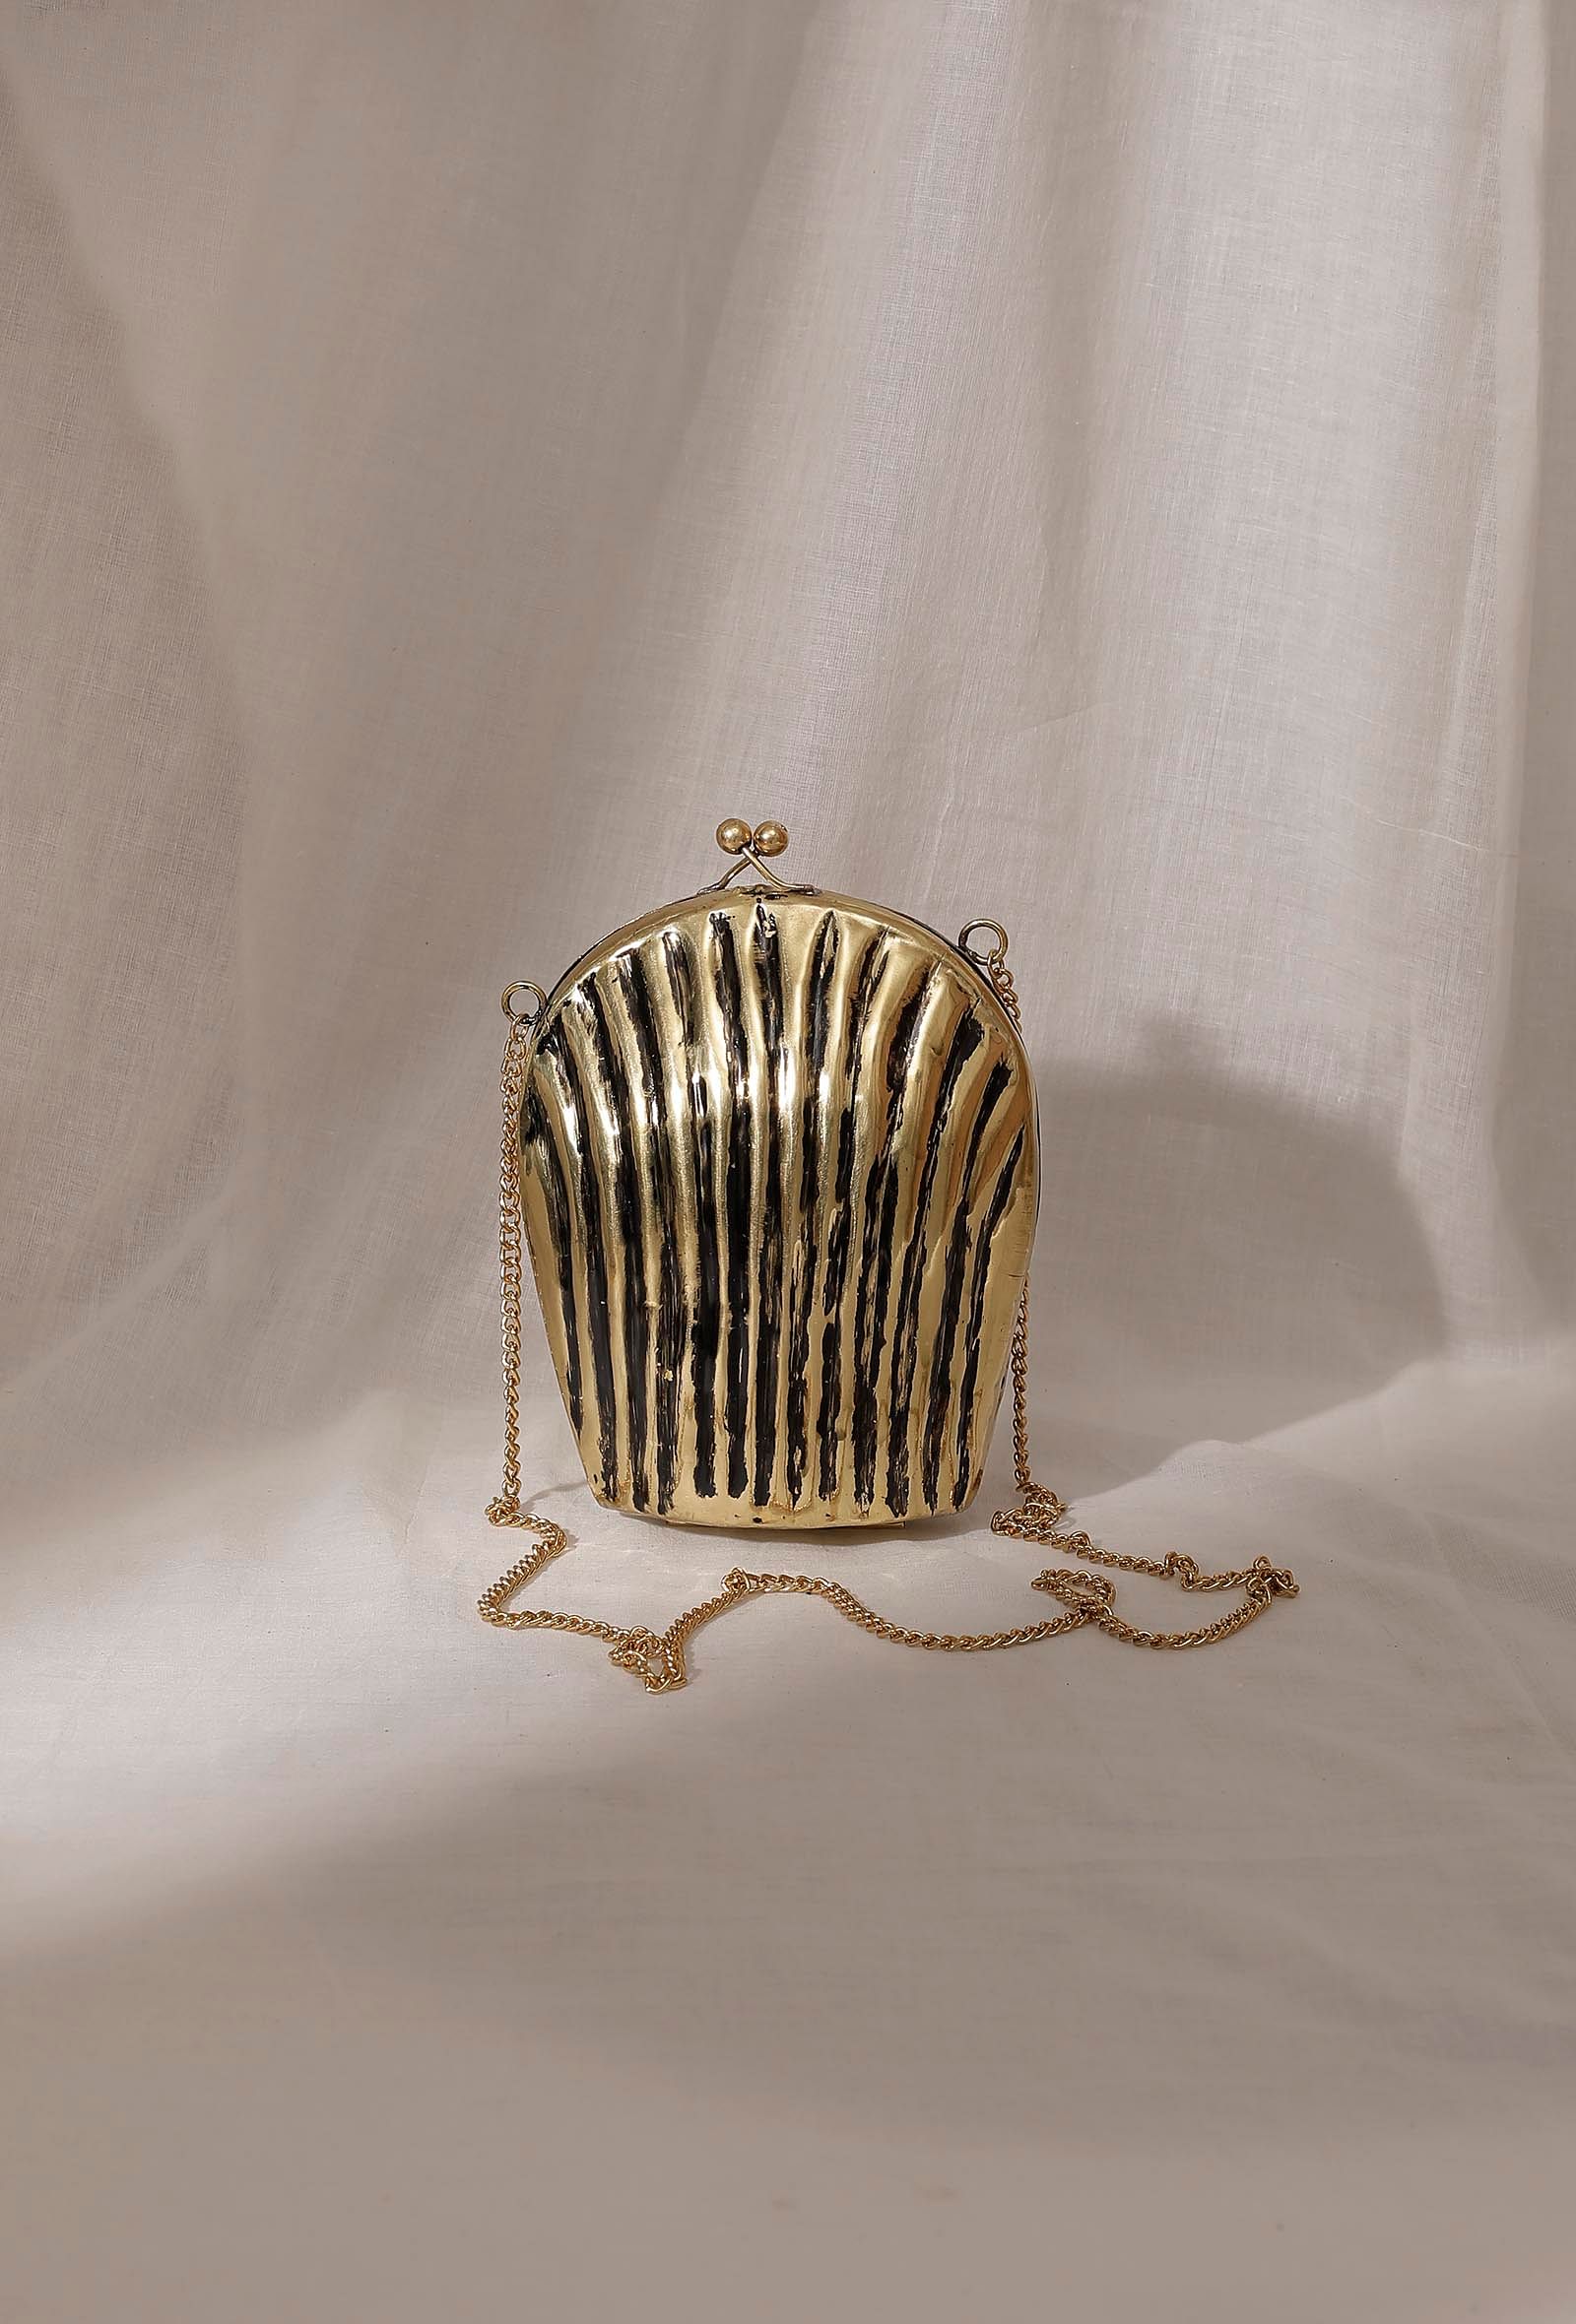 Vintage Metal Clutch with Shell Ornate 1970's at 1stDibs | vintage metal  clutch purse, vintage mother of pearl clutch